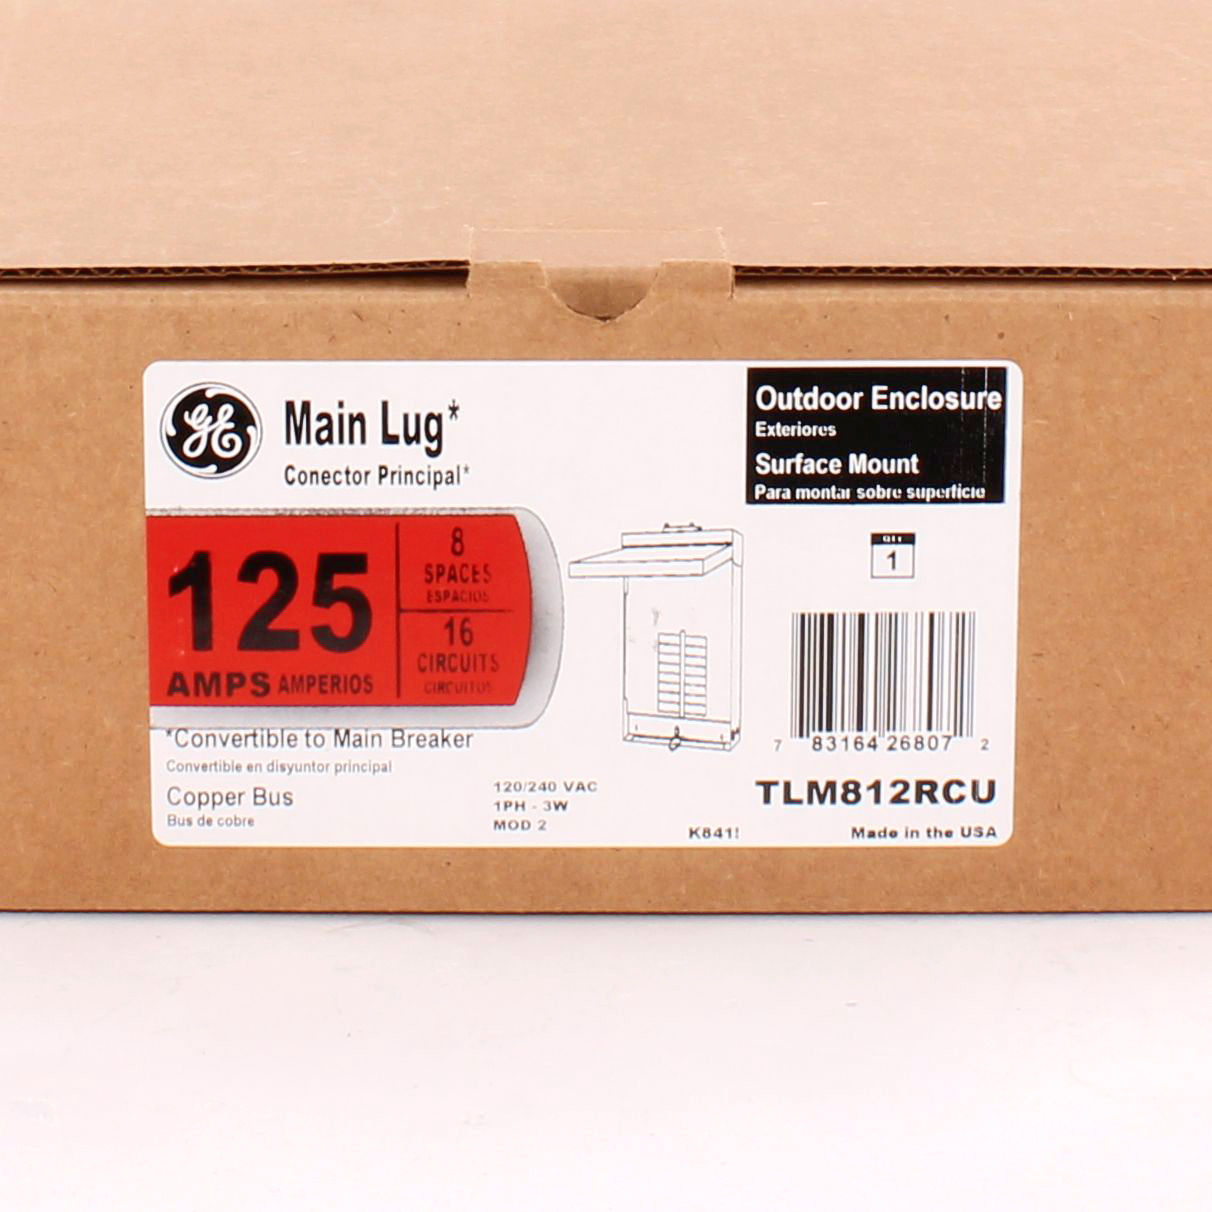 GEE TLM812RCU 8 CIRC MAIN LUG 125A 3R OUTDOOR SURFACE GROUNG TGL2 NOT INCL CONV TO MB W/ THQLRK2